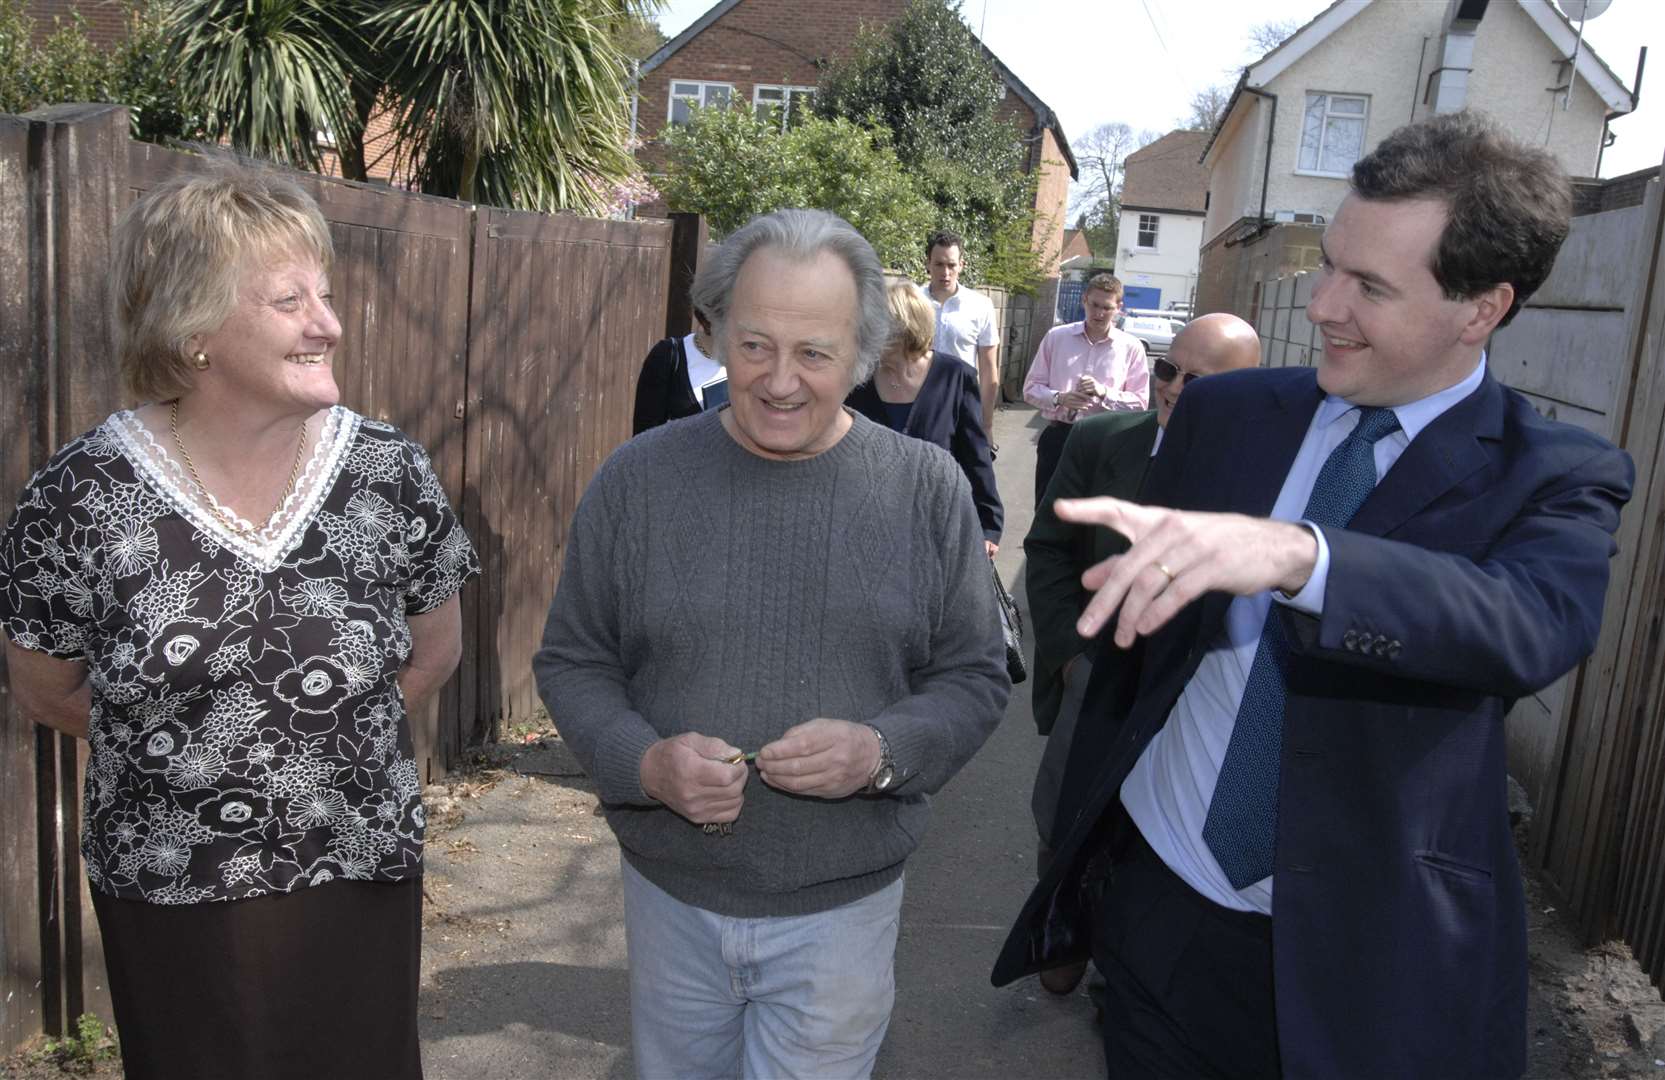 Marion Ring in 2007, showing the then Shadow Chancellor George Osborne (right) around her beloved Shepway North ward, accompanied by local resident John Kingdon